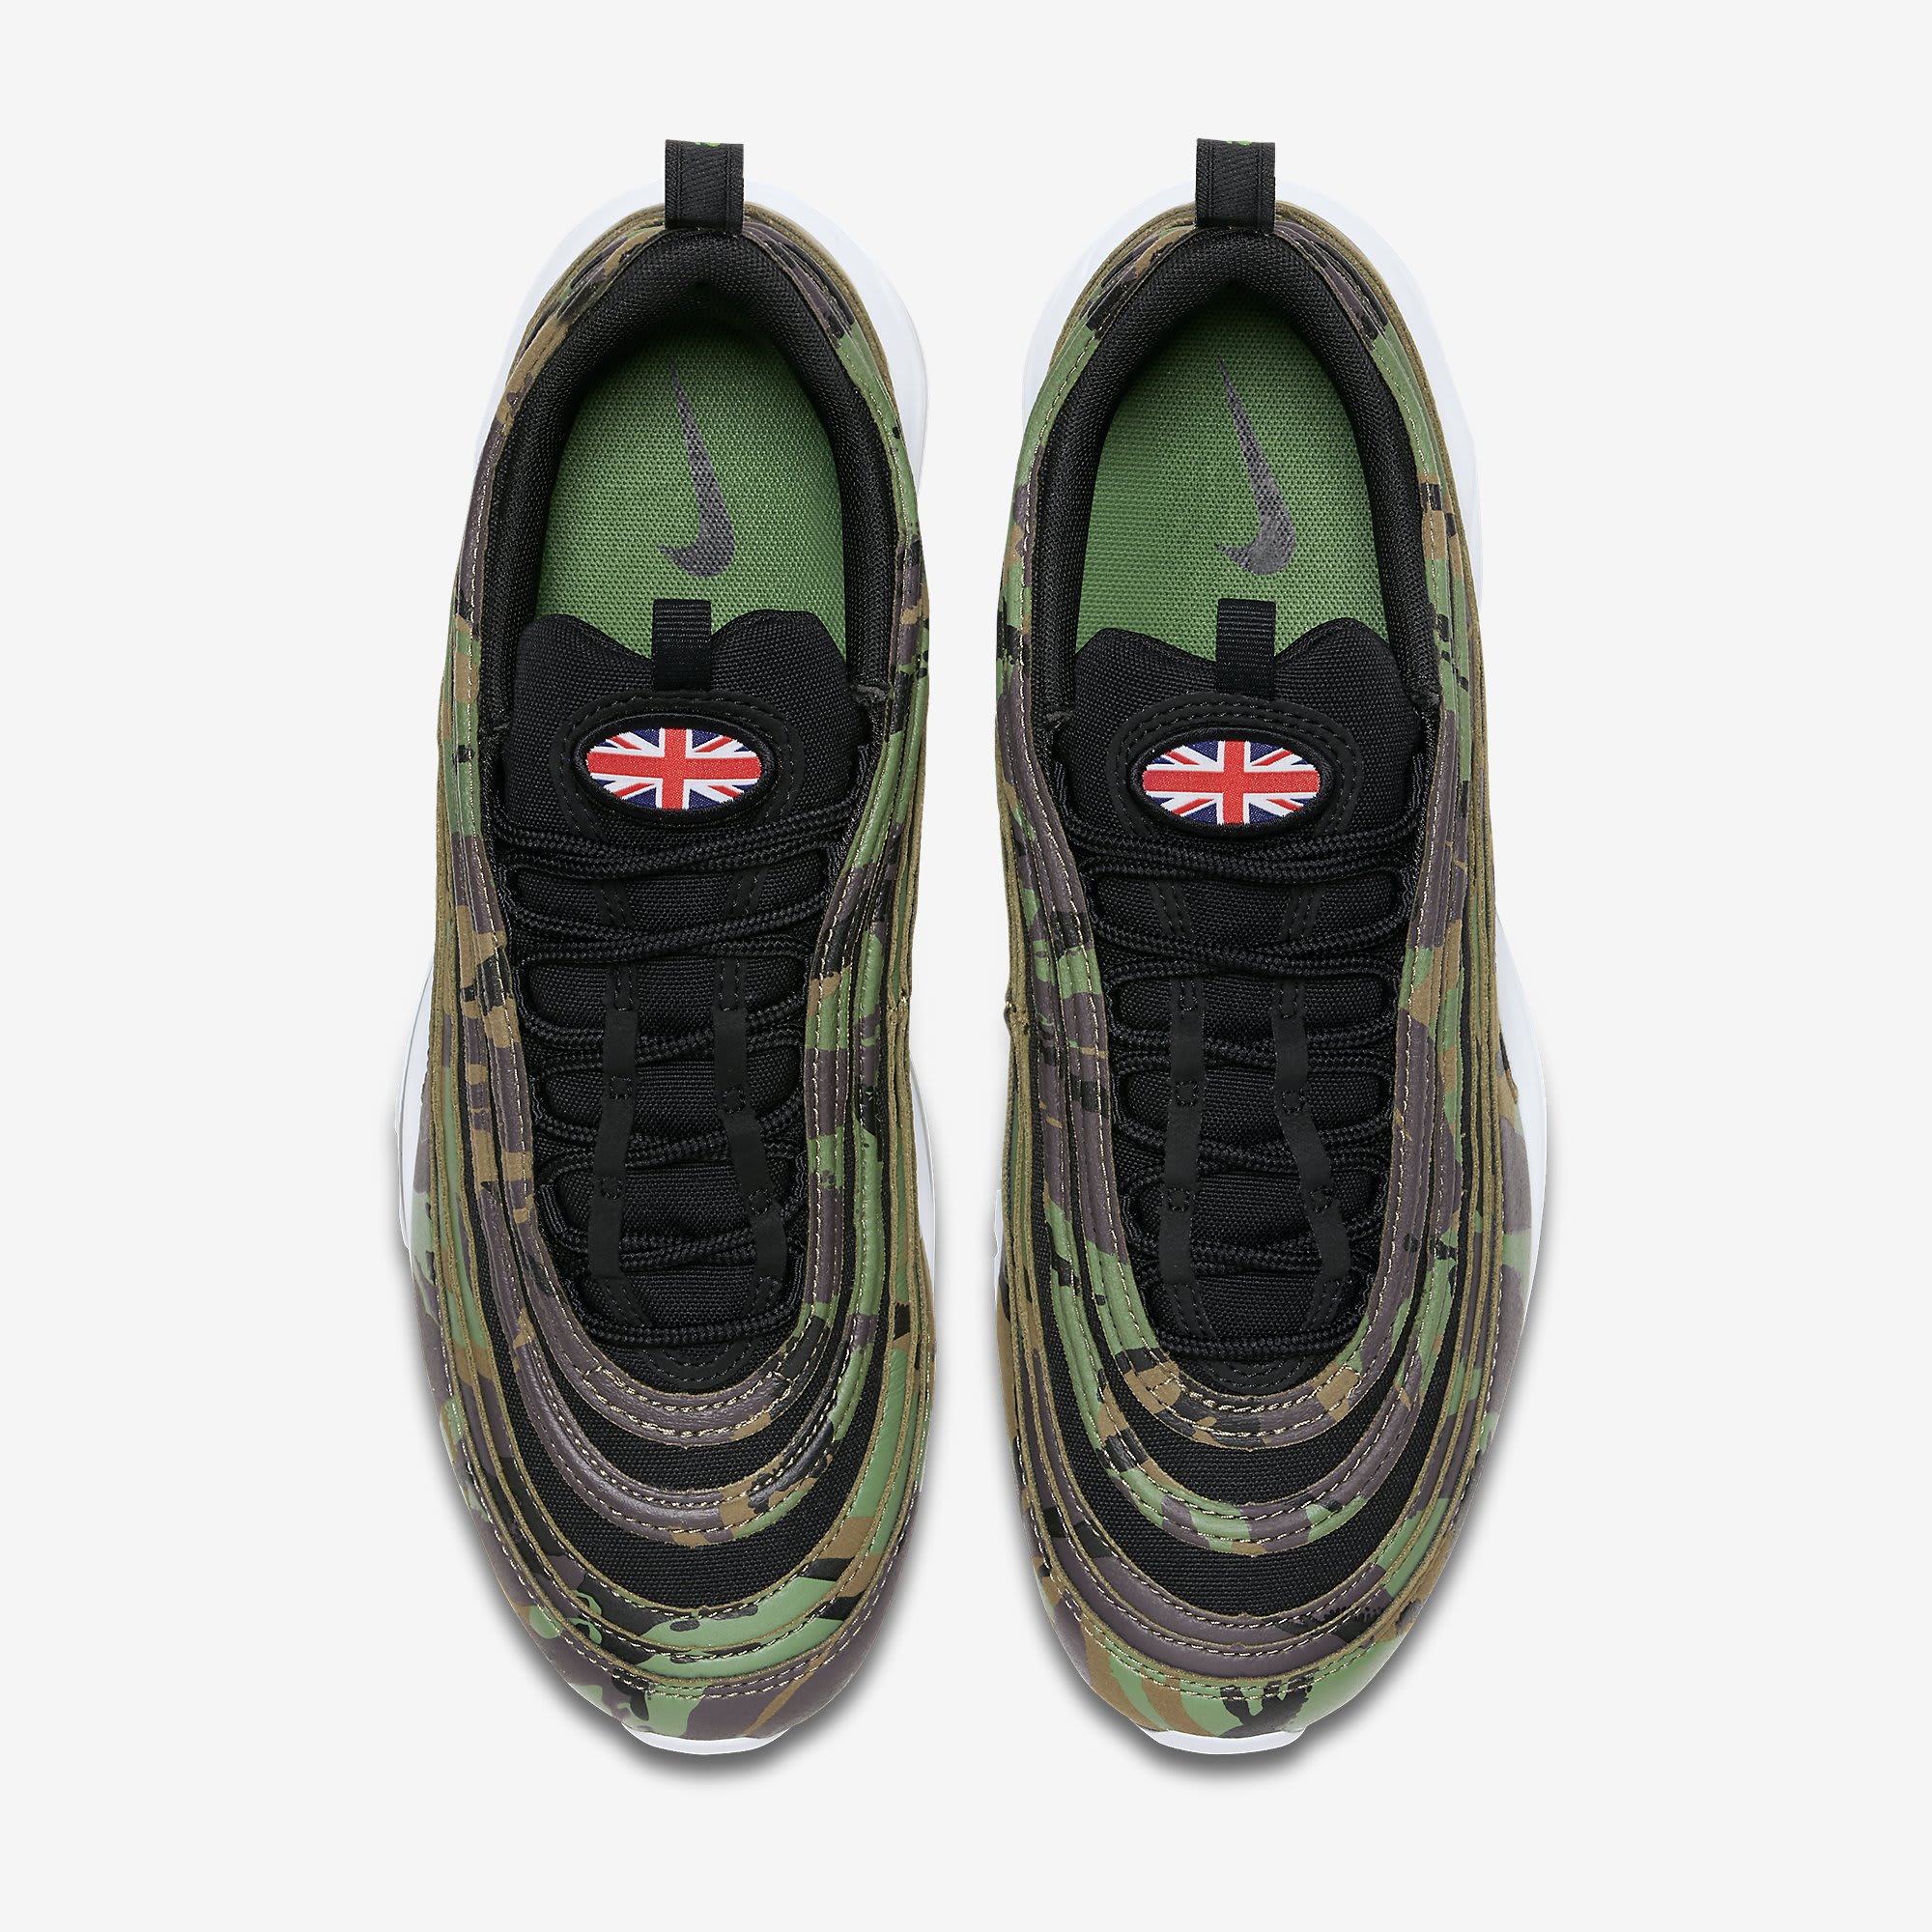 lexicon mobiel arm Nike Is Releasing a 'Country Camo' Pack of Air Max 97s | Complex